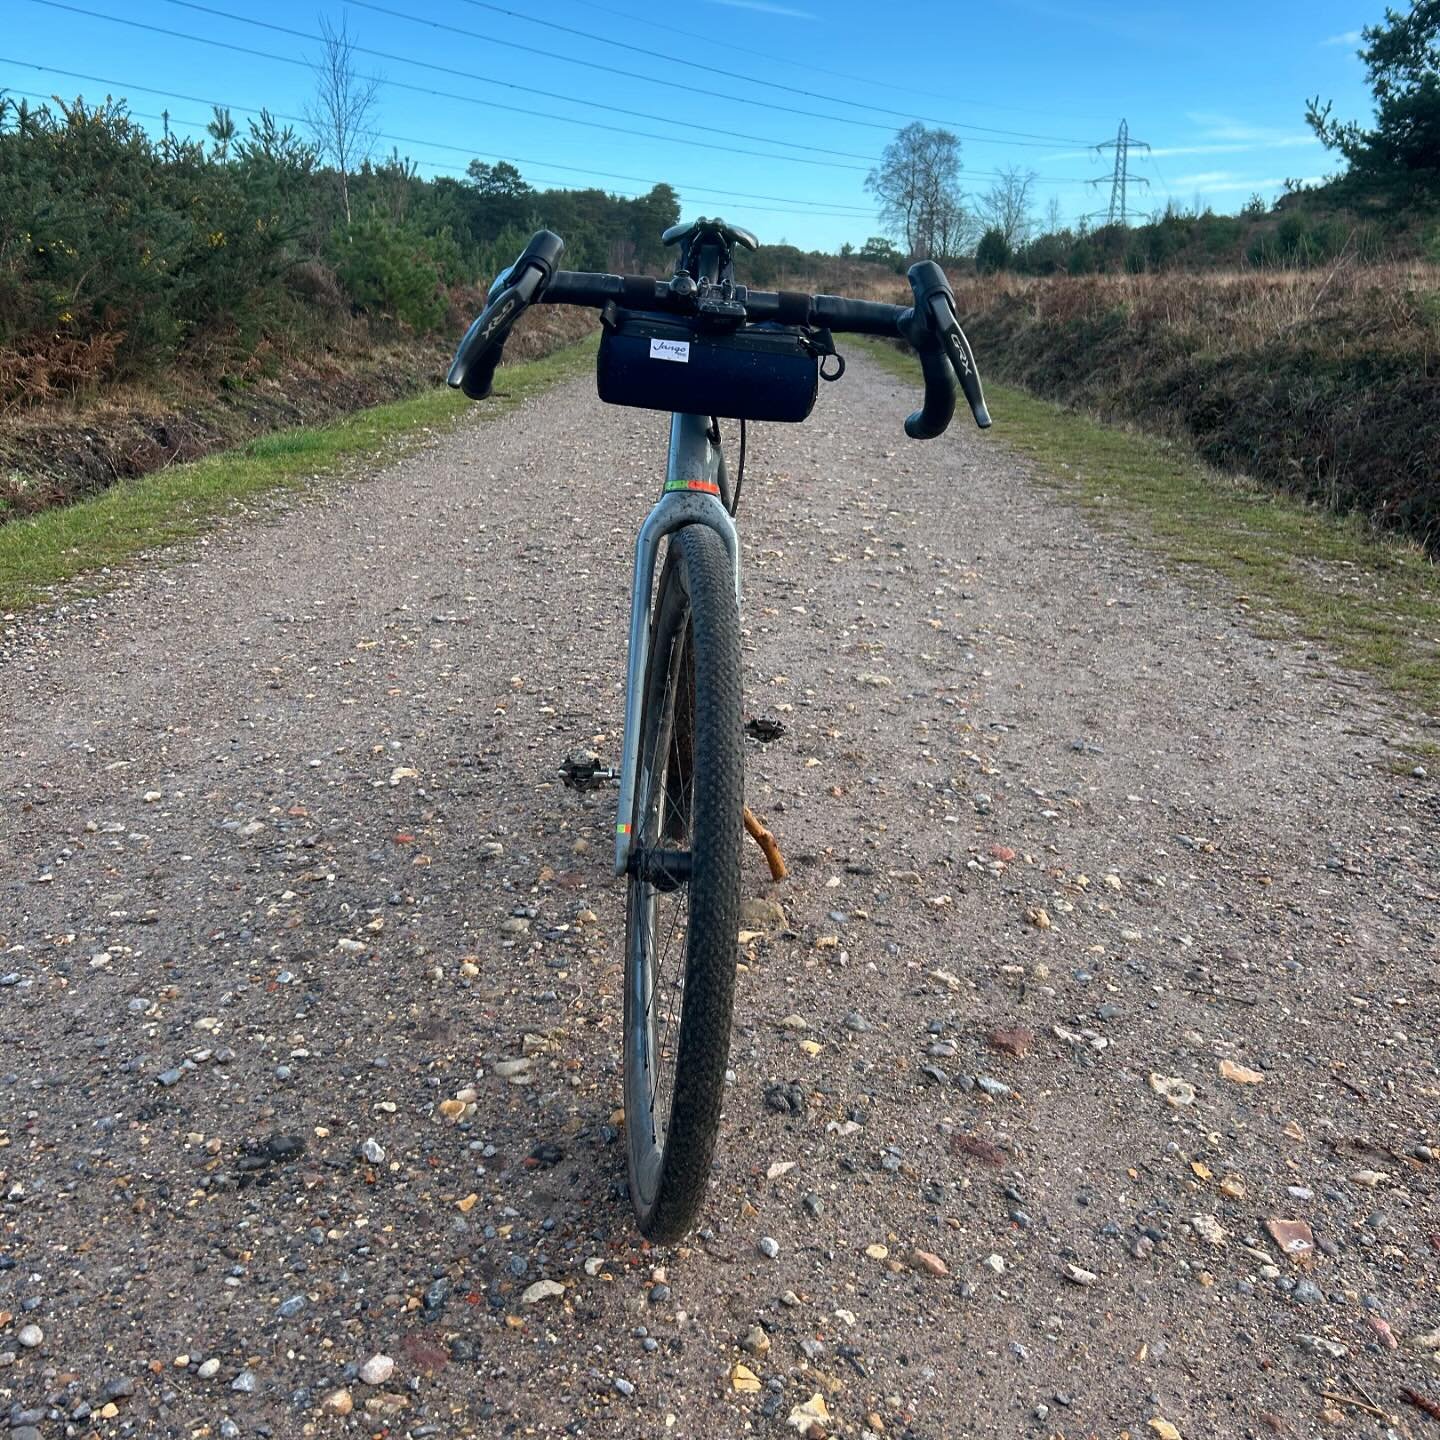 Making the most of this dry weather. Feels like summer is on its way. ☀️☀️☀️

Free UK delivery on all orders. Free international delivery on orders over &pound;100.

#jangorolls #toolroll #gravelbike #gravelgrinder #gravelbikes #roadbike #windsor #ha